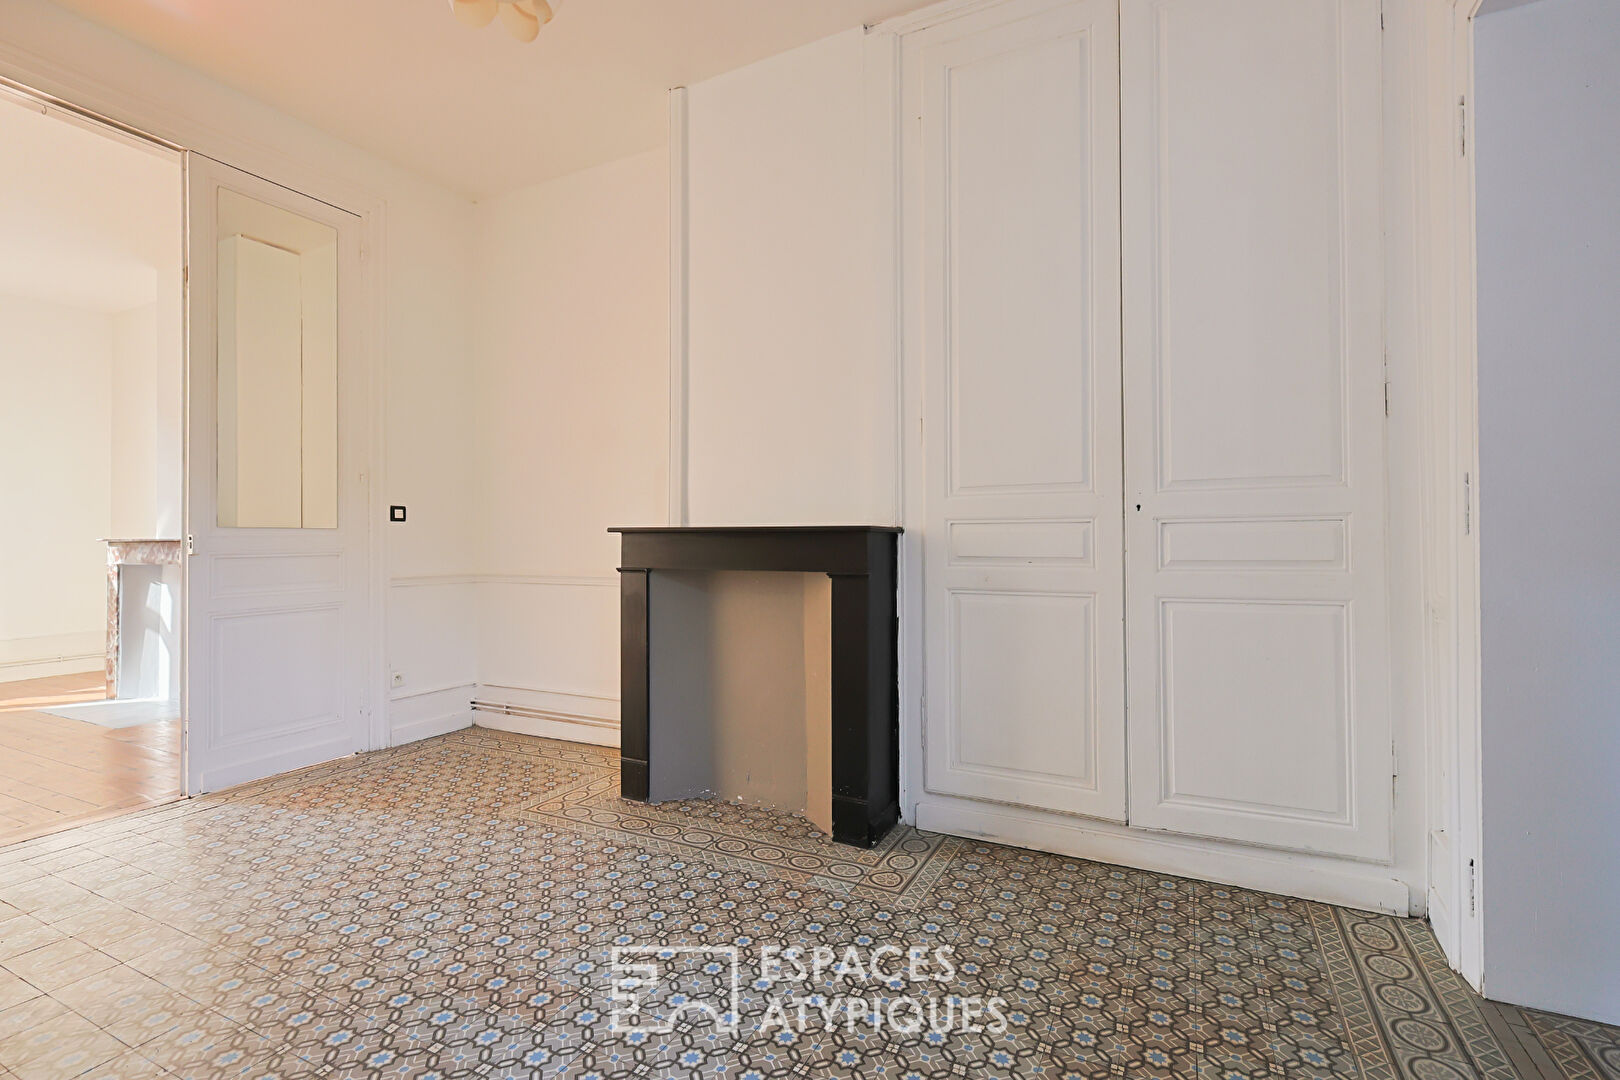 Duplex apartment with garden in the heart of Arras